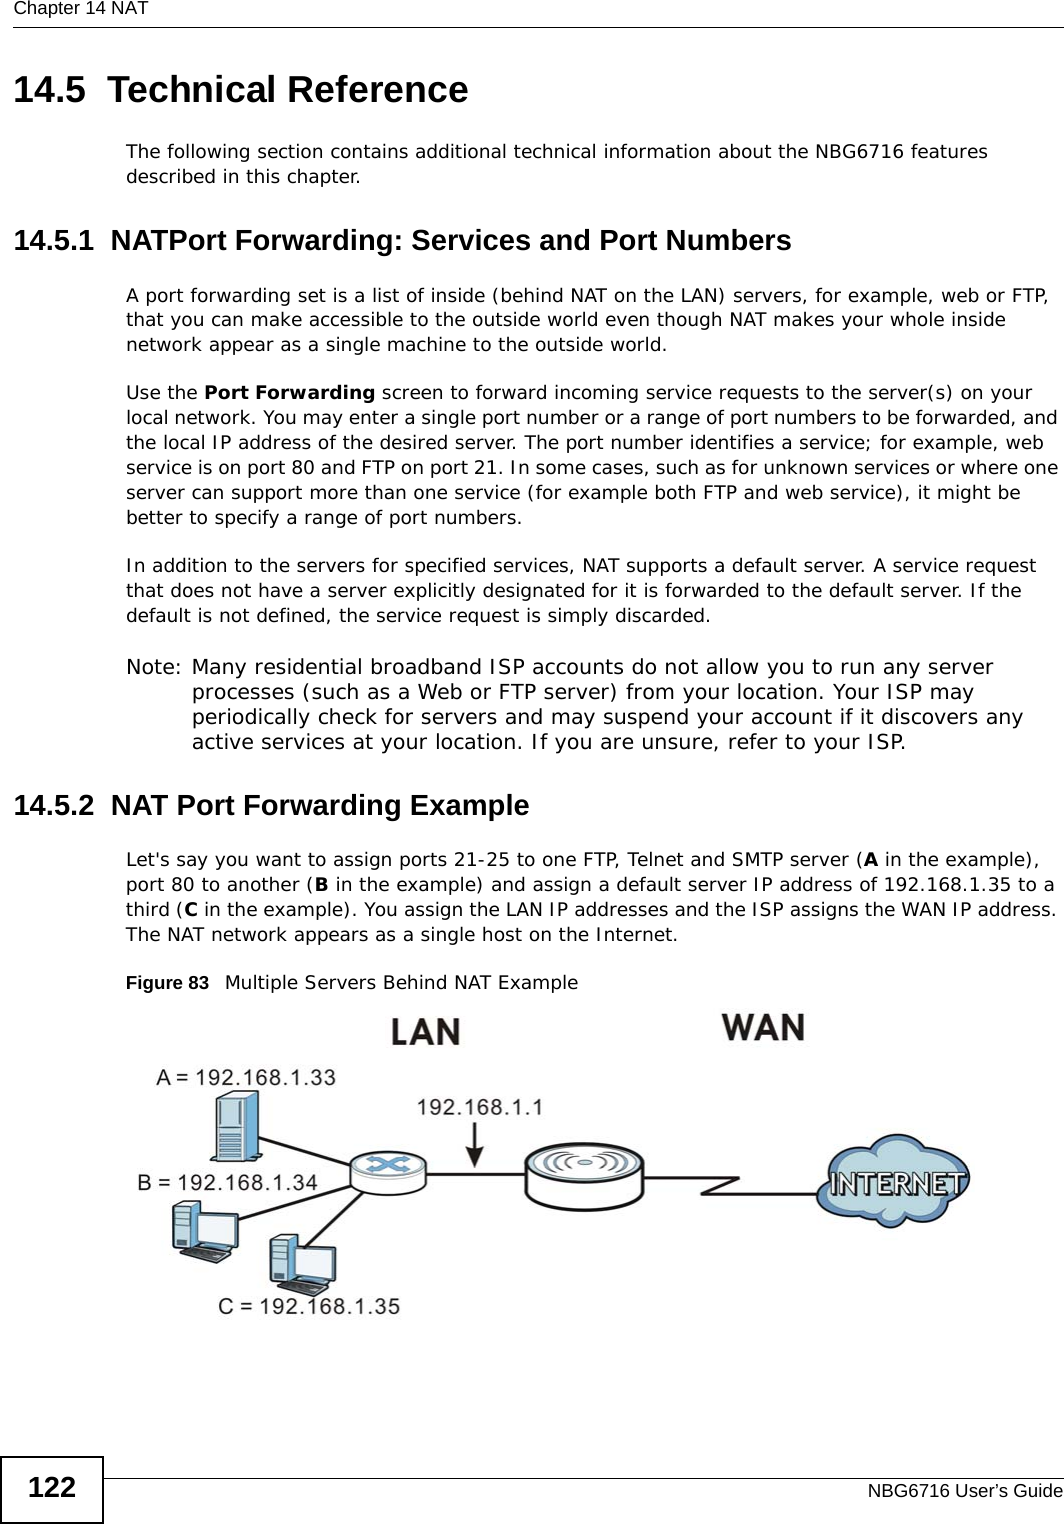 Chapter 14 NATNBG6716 User’s Guide12214.5  Technical ReferenceThe following section contains additional technical information about the NBG6716 features described in this chapter.14.5.1  NATPort Forwarding: Services and Port NumbersA port forwarding set is a list of inside (behind NAT on the LAN) servers, for example, web or FTP, that you can make accessible to the outside world even though NAT makes your whole inside network appear as a single machine to the outside world. Use the Port Forwarding screen to forward incoming service requests to the server(s) on your local network. You may enter a single port number or a range of port numbers to be forwarded, and the local IP address of the desired server. The port number identifies a service; for example, web service is on port 80 and FTP on port 21. In some cases, such as for unknown services or where one server can support more than one service (for example both FTP and web service), it might be better to specify a range of port numbers.In addition to the servers for specified services, NAT supports a default server. A service request that does not have a server explicitly designated for it is forwarded to the default server. If the default is not defined, the service request is simply discarded.Note: Many residential broadband ISP accounts do not allow you to run any server processes (such as a Web or FTP server) from your location. Your ISP may periodically check for servers and may suspend your account if it discovers any active services at your location. If you are unsure, refer to your ISP.14.5.2  NAT Port Forwarding ExampleLet&apos;s say you want to assign ports 21-25 to one FTP, Telnet and SMTP server (A in the example), port 80 to another (B in the example) and assign a default server IP address of 192.168.1.35 to a third (C in the example). You assign the LAN IP addresses and the ISP assigns the WAN IP address. The NAT network appears as a single host on the Internet.Figure 83   Multiple Servers Behind NAT Example